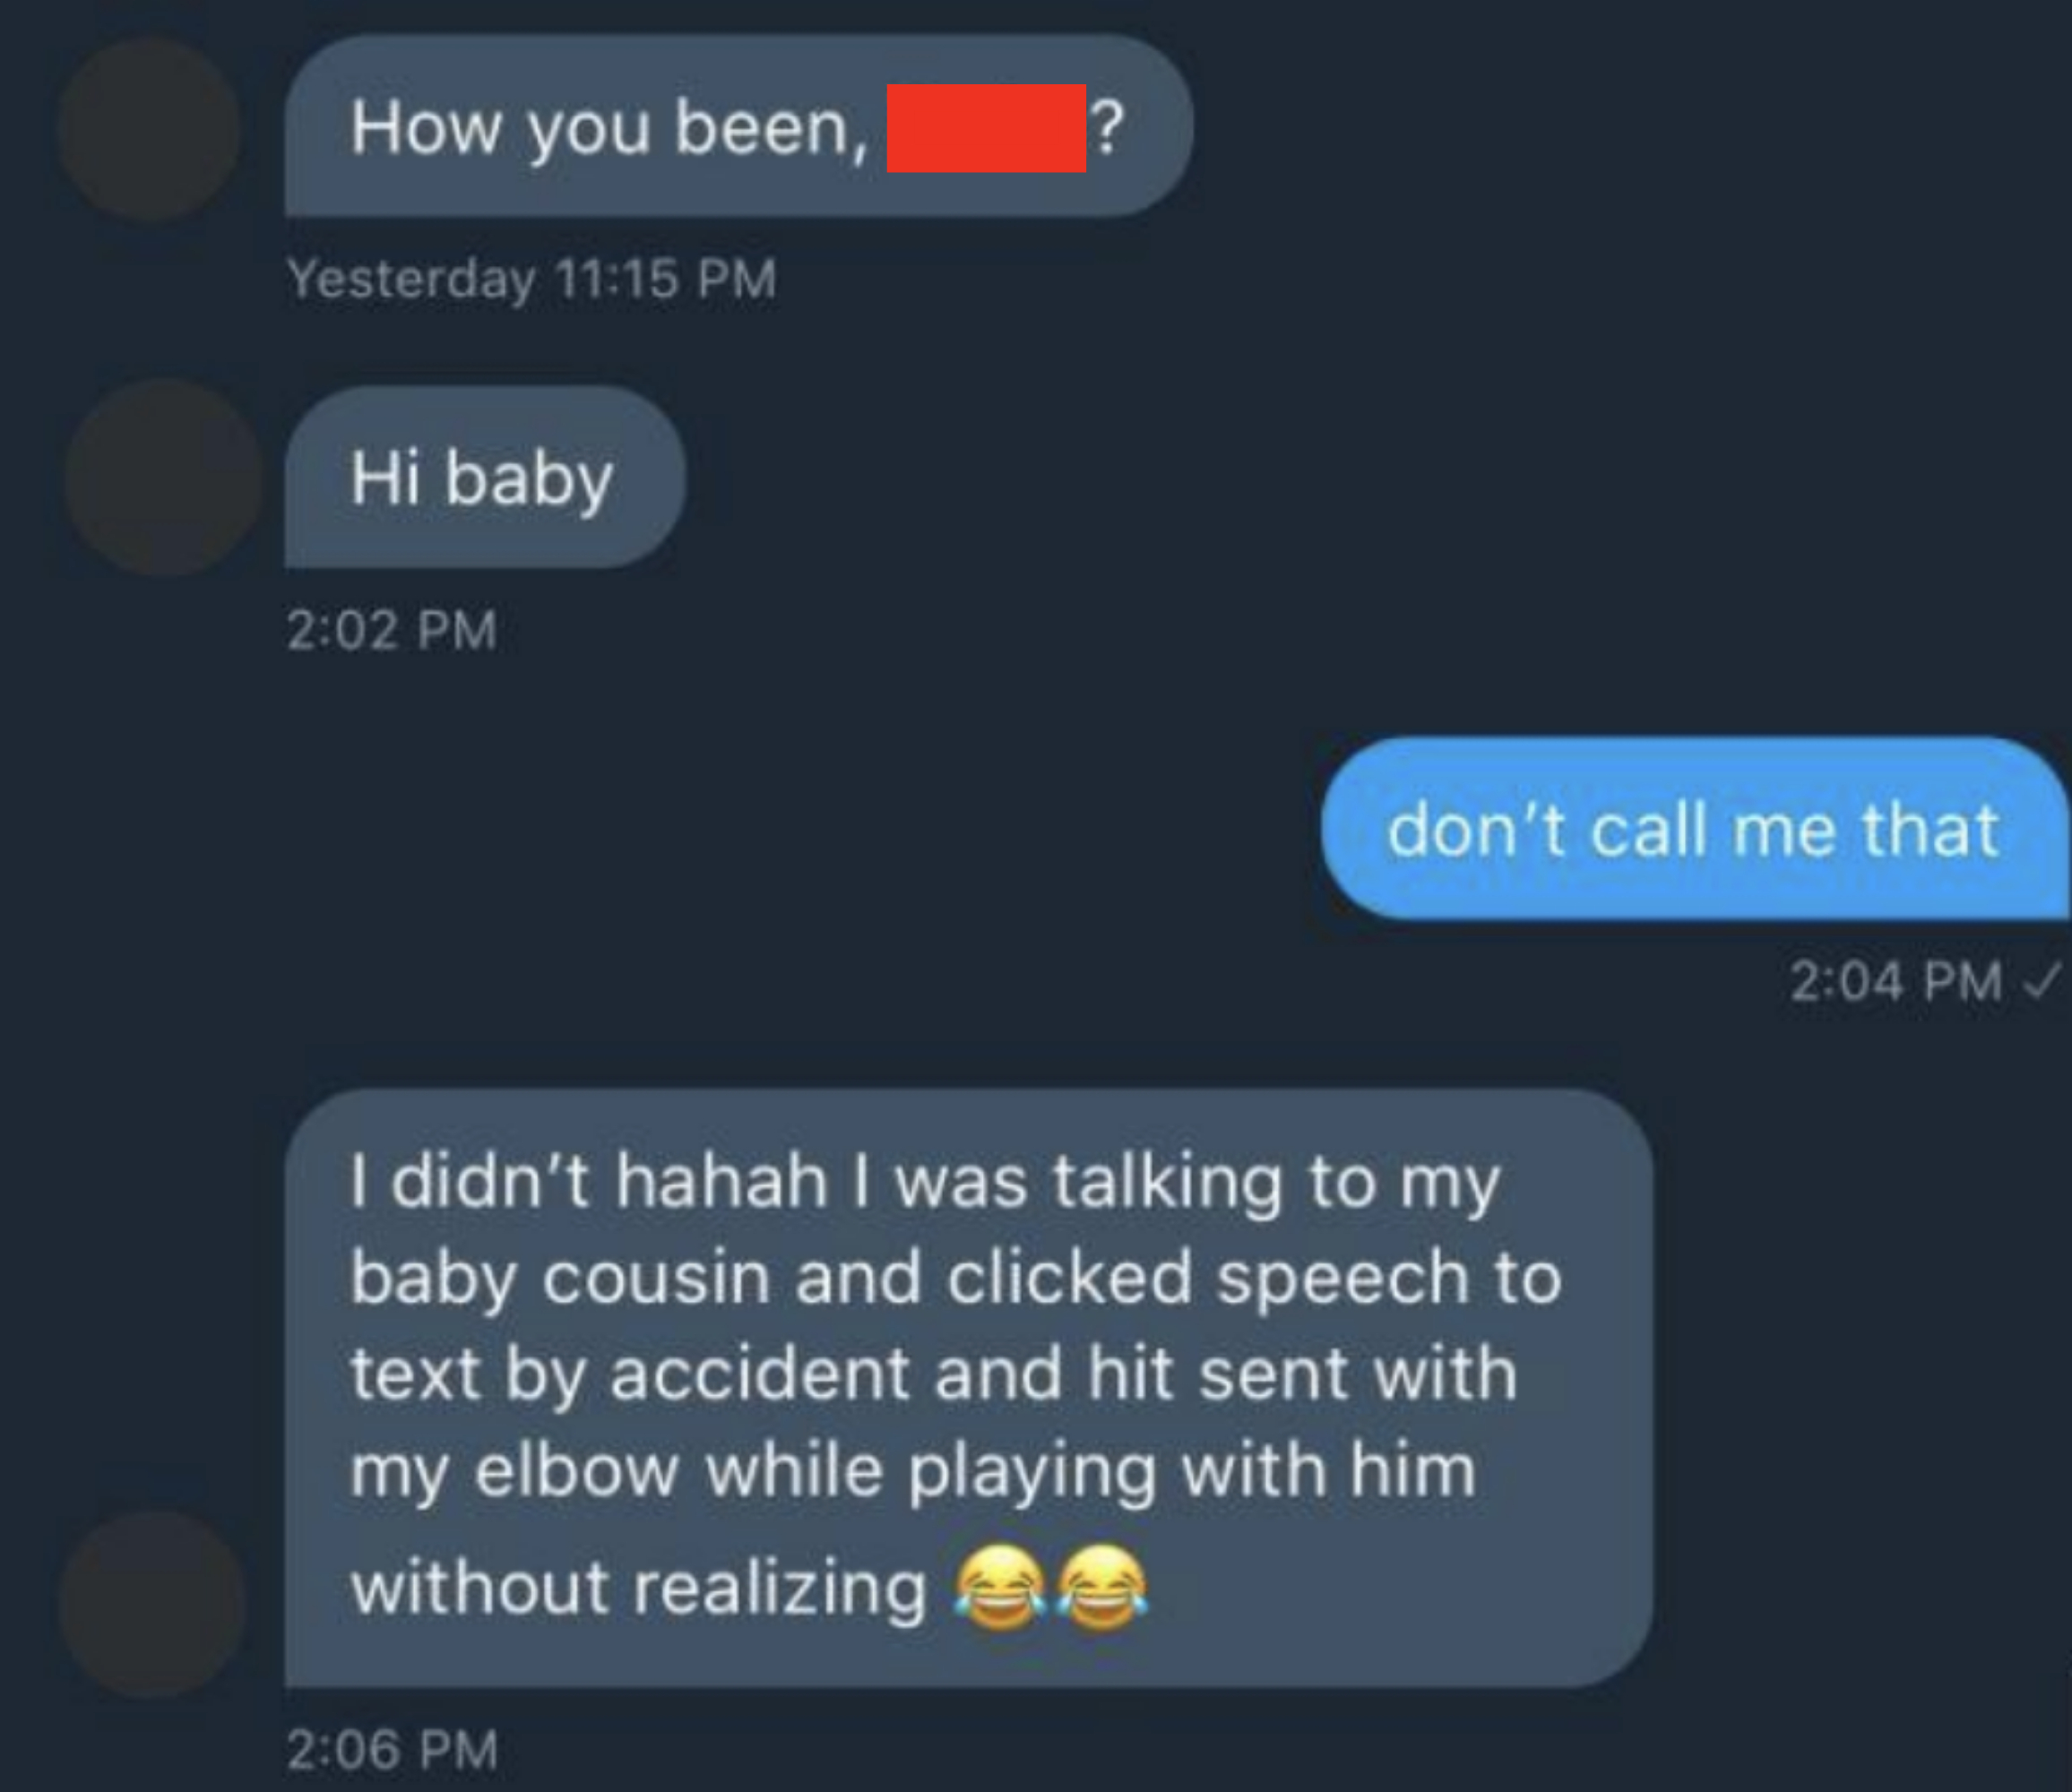 The first person says &quot;hi baby,&quot; the second says &quot;don&#x27;t call me that,&quot; and the first claims they were using speech to text and talking to their baby cousin